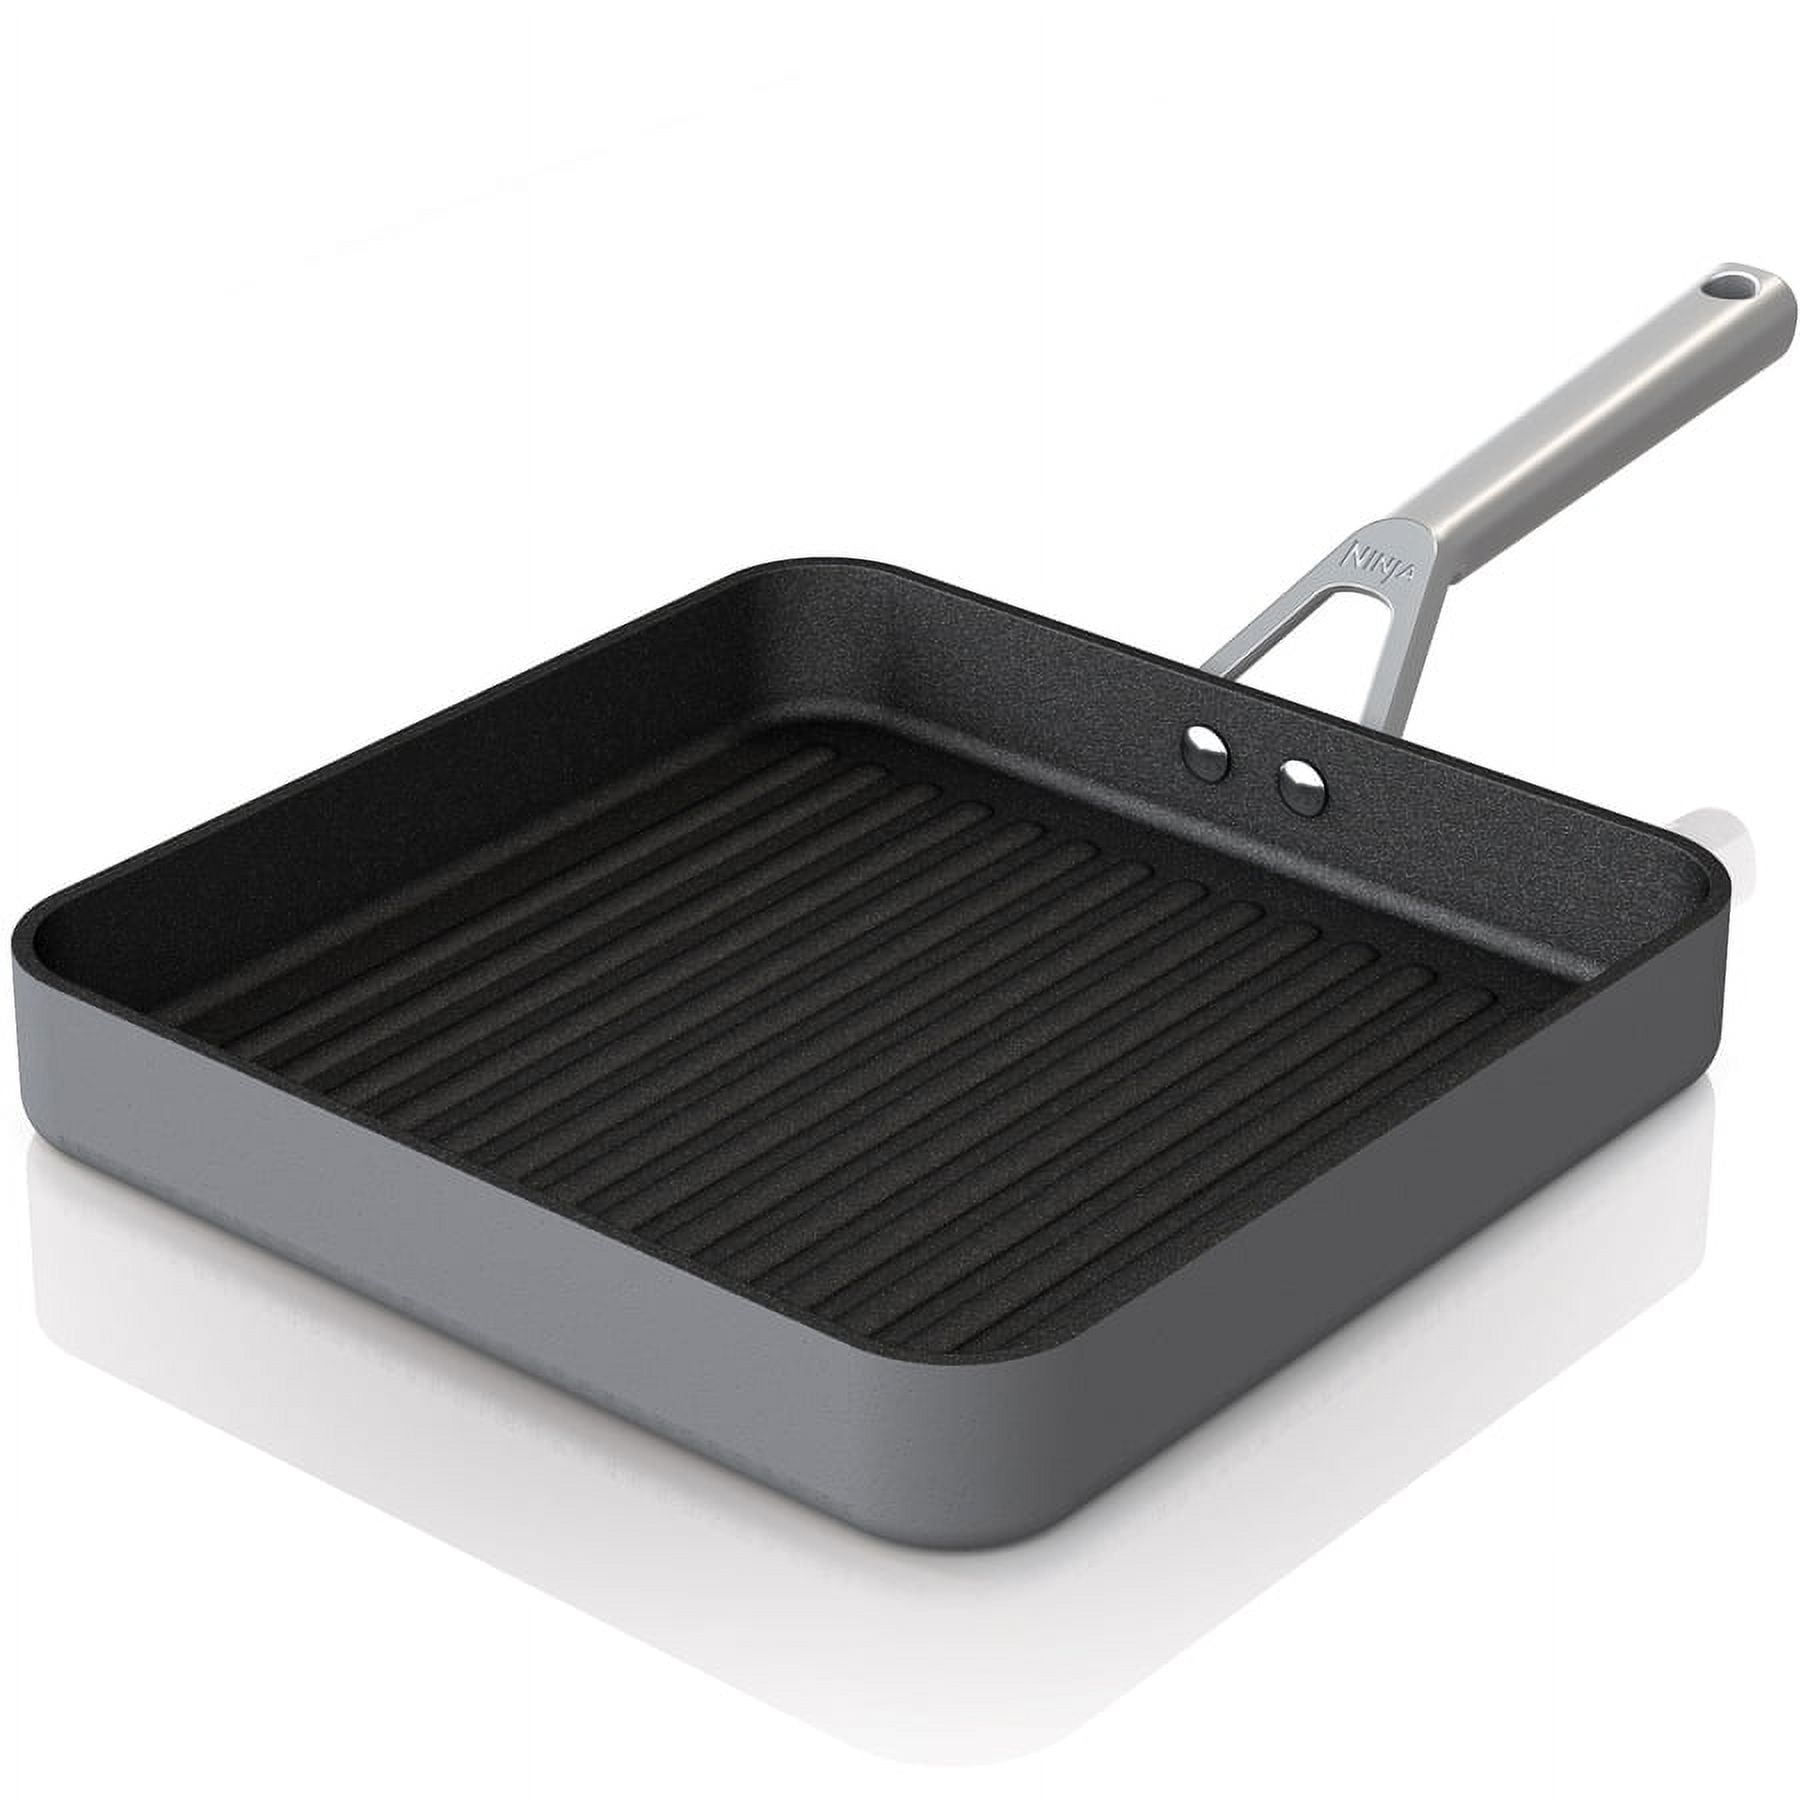 SAKUCHI Sakuchi 11 Inch grill Pan for Stove Tops Induction compatible, Nonstick Square griddle Pan for grilling, Frying, Sauteing